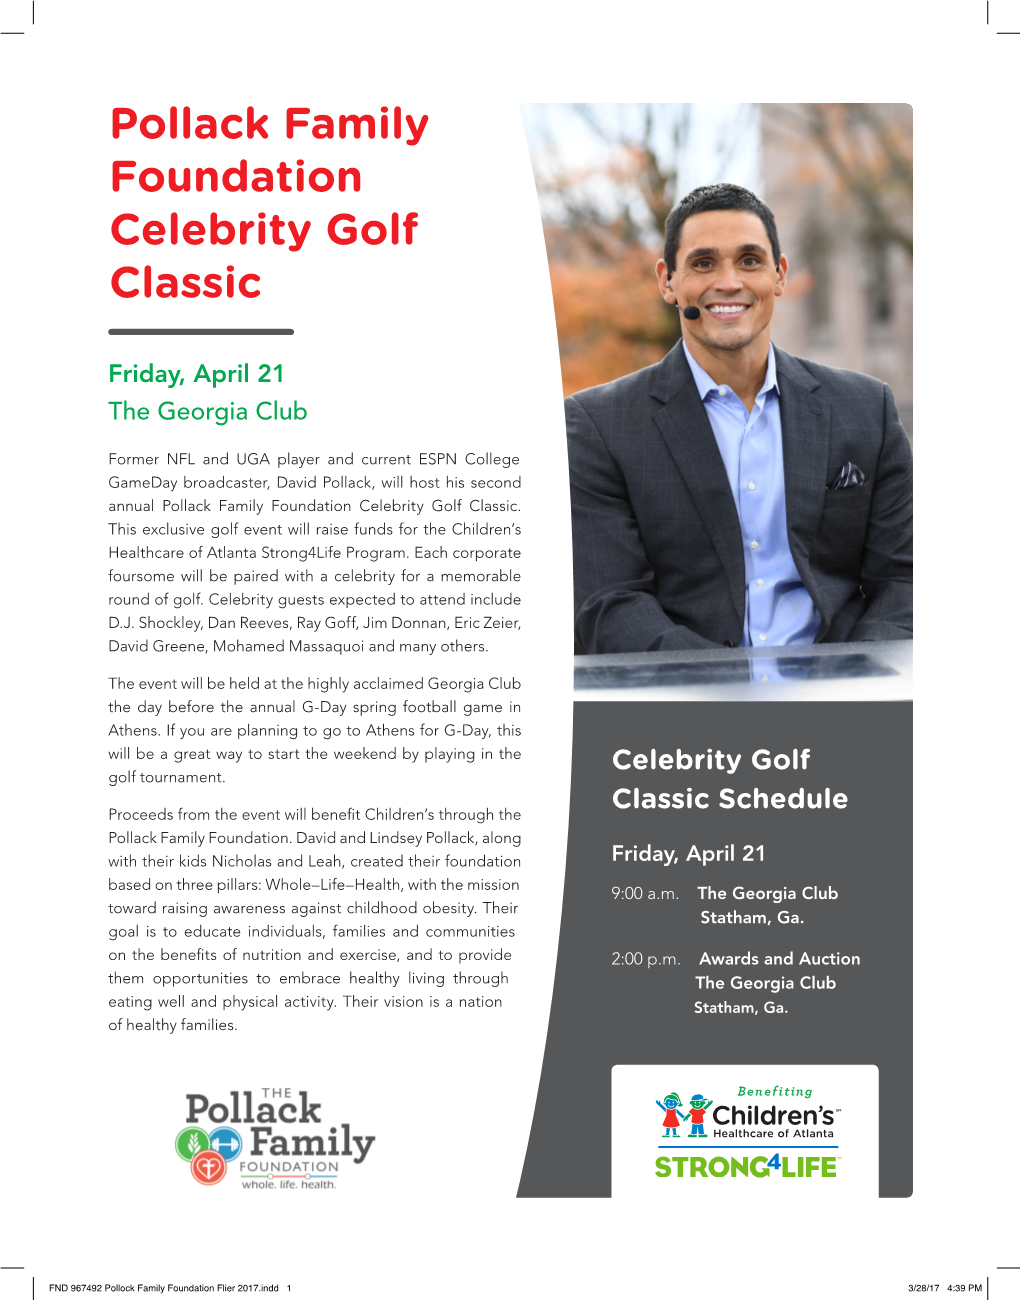 Pollack Family Foundation Celebrity Golf Classic